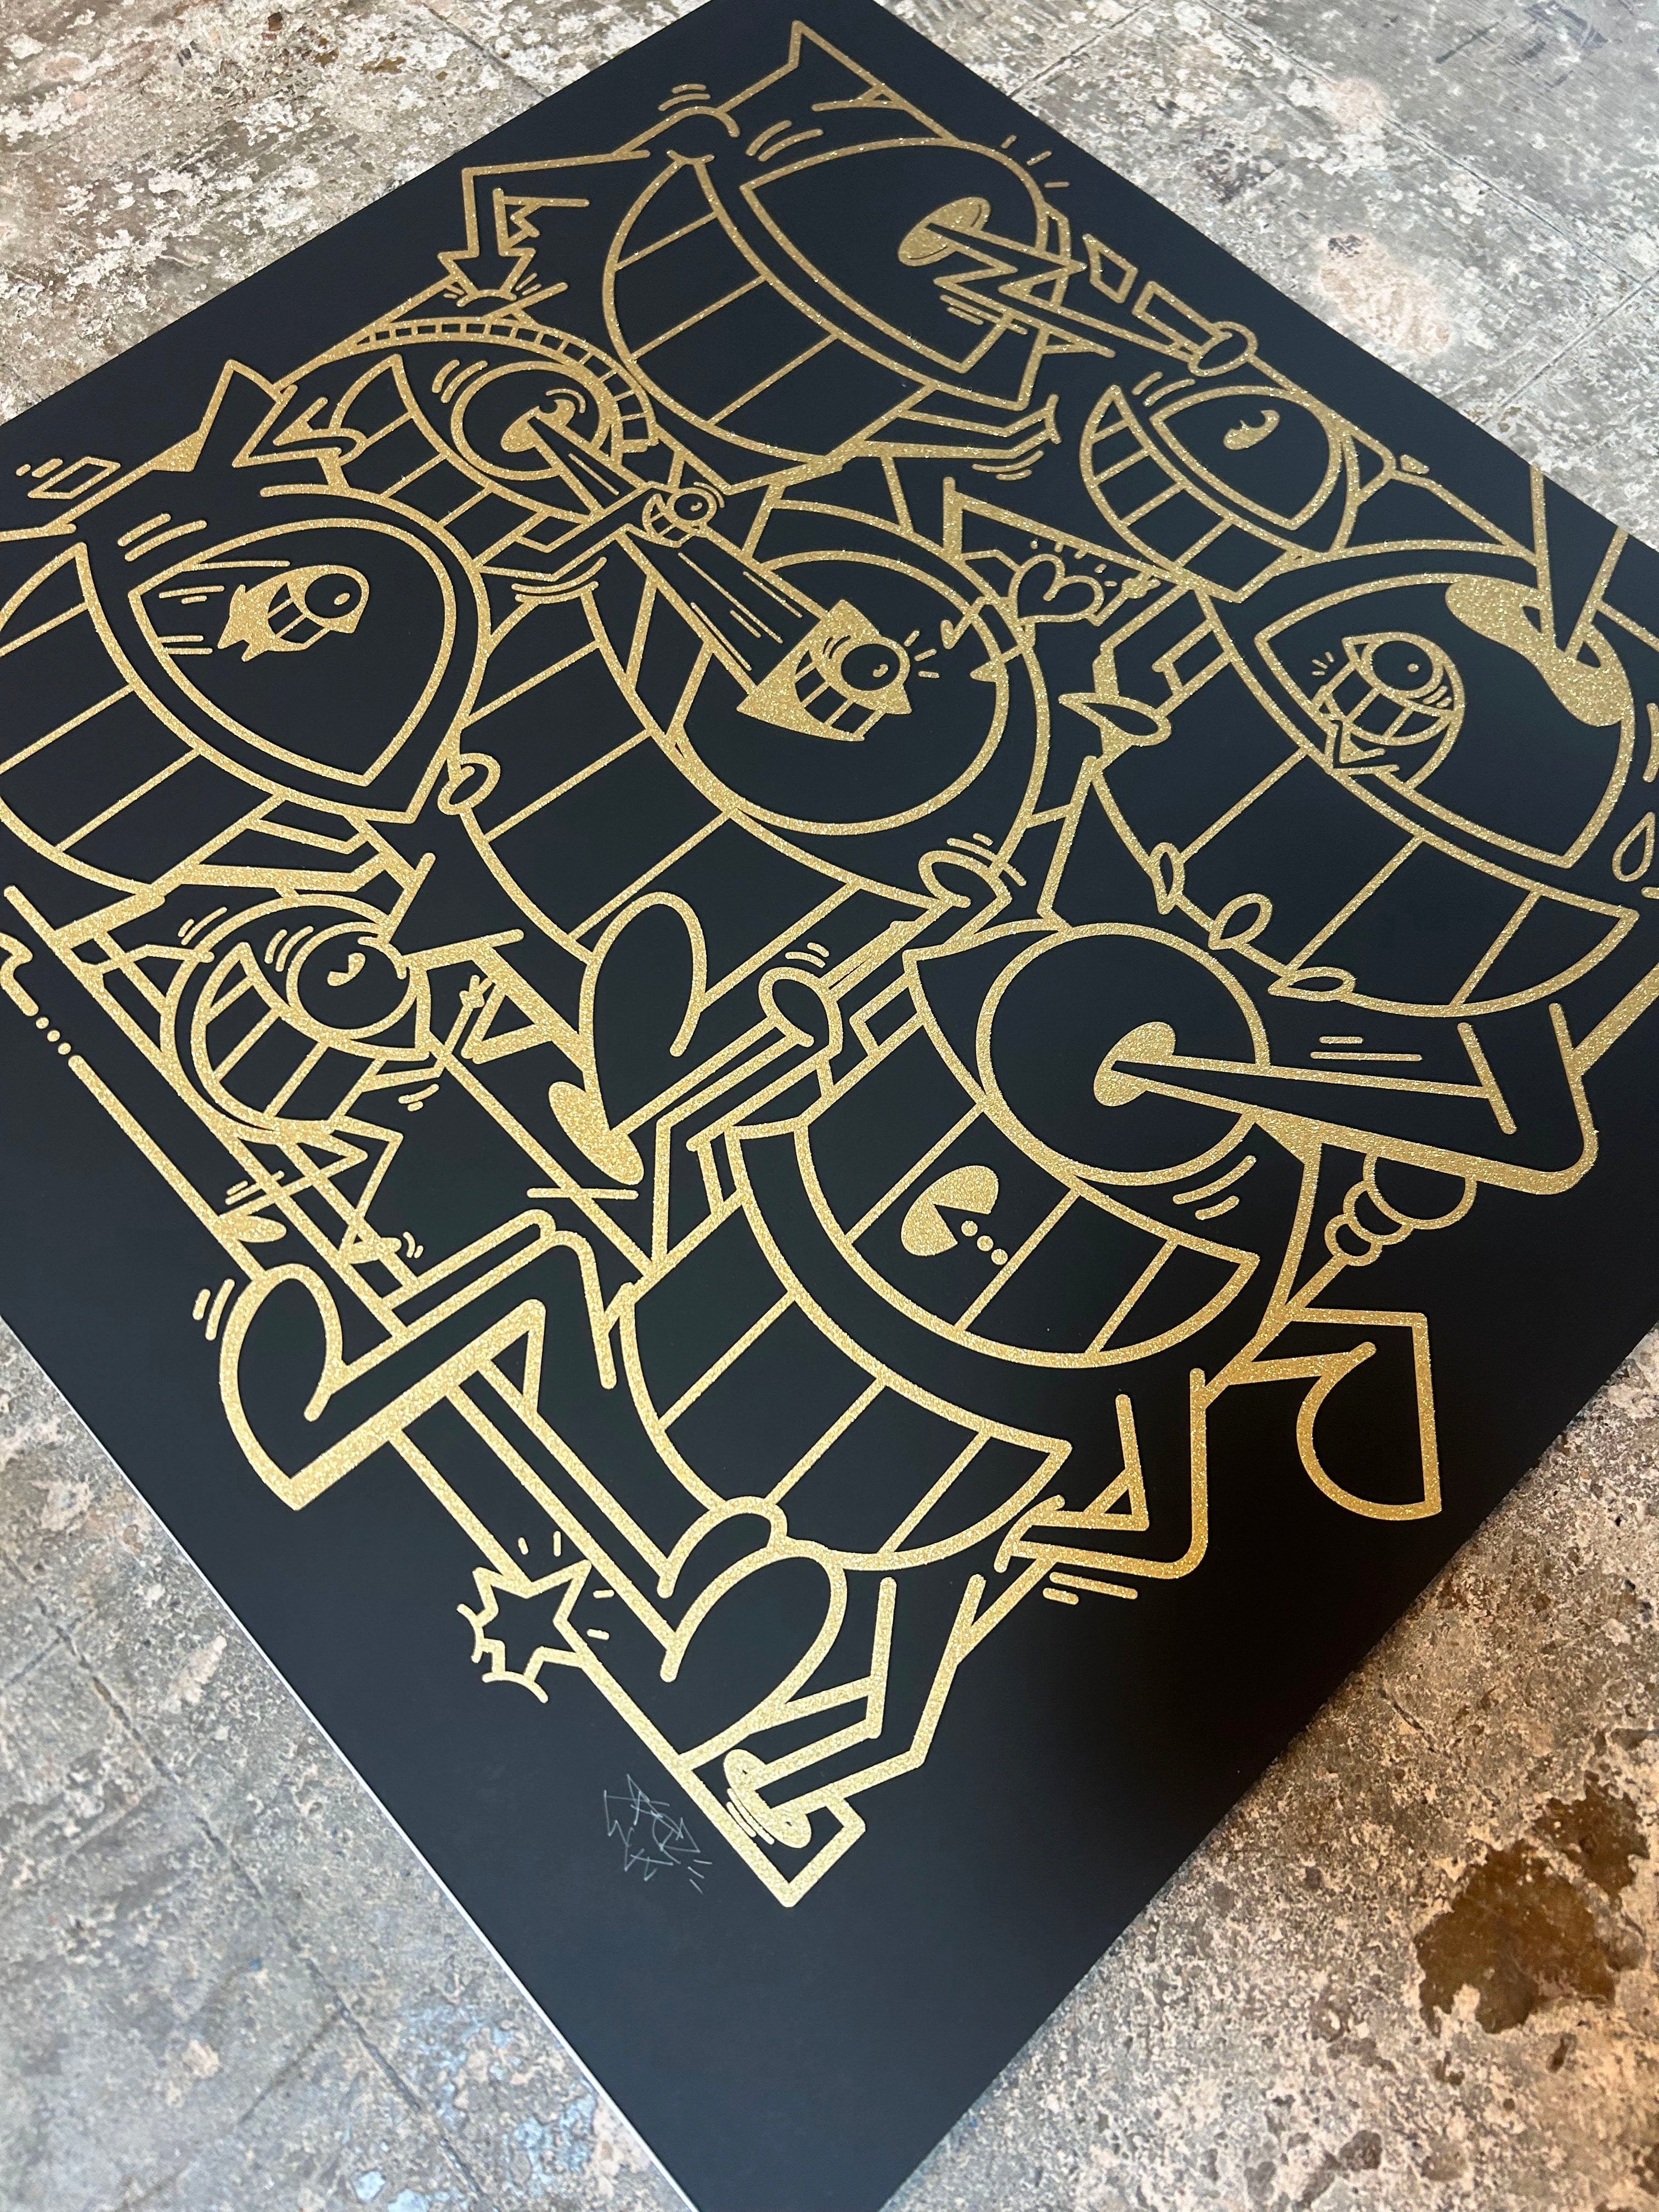 EL PEZ - SMILES IN STYLE BLACK GOLD GLITTER - ed 14 with free mini screen print for colouring in